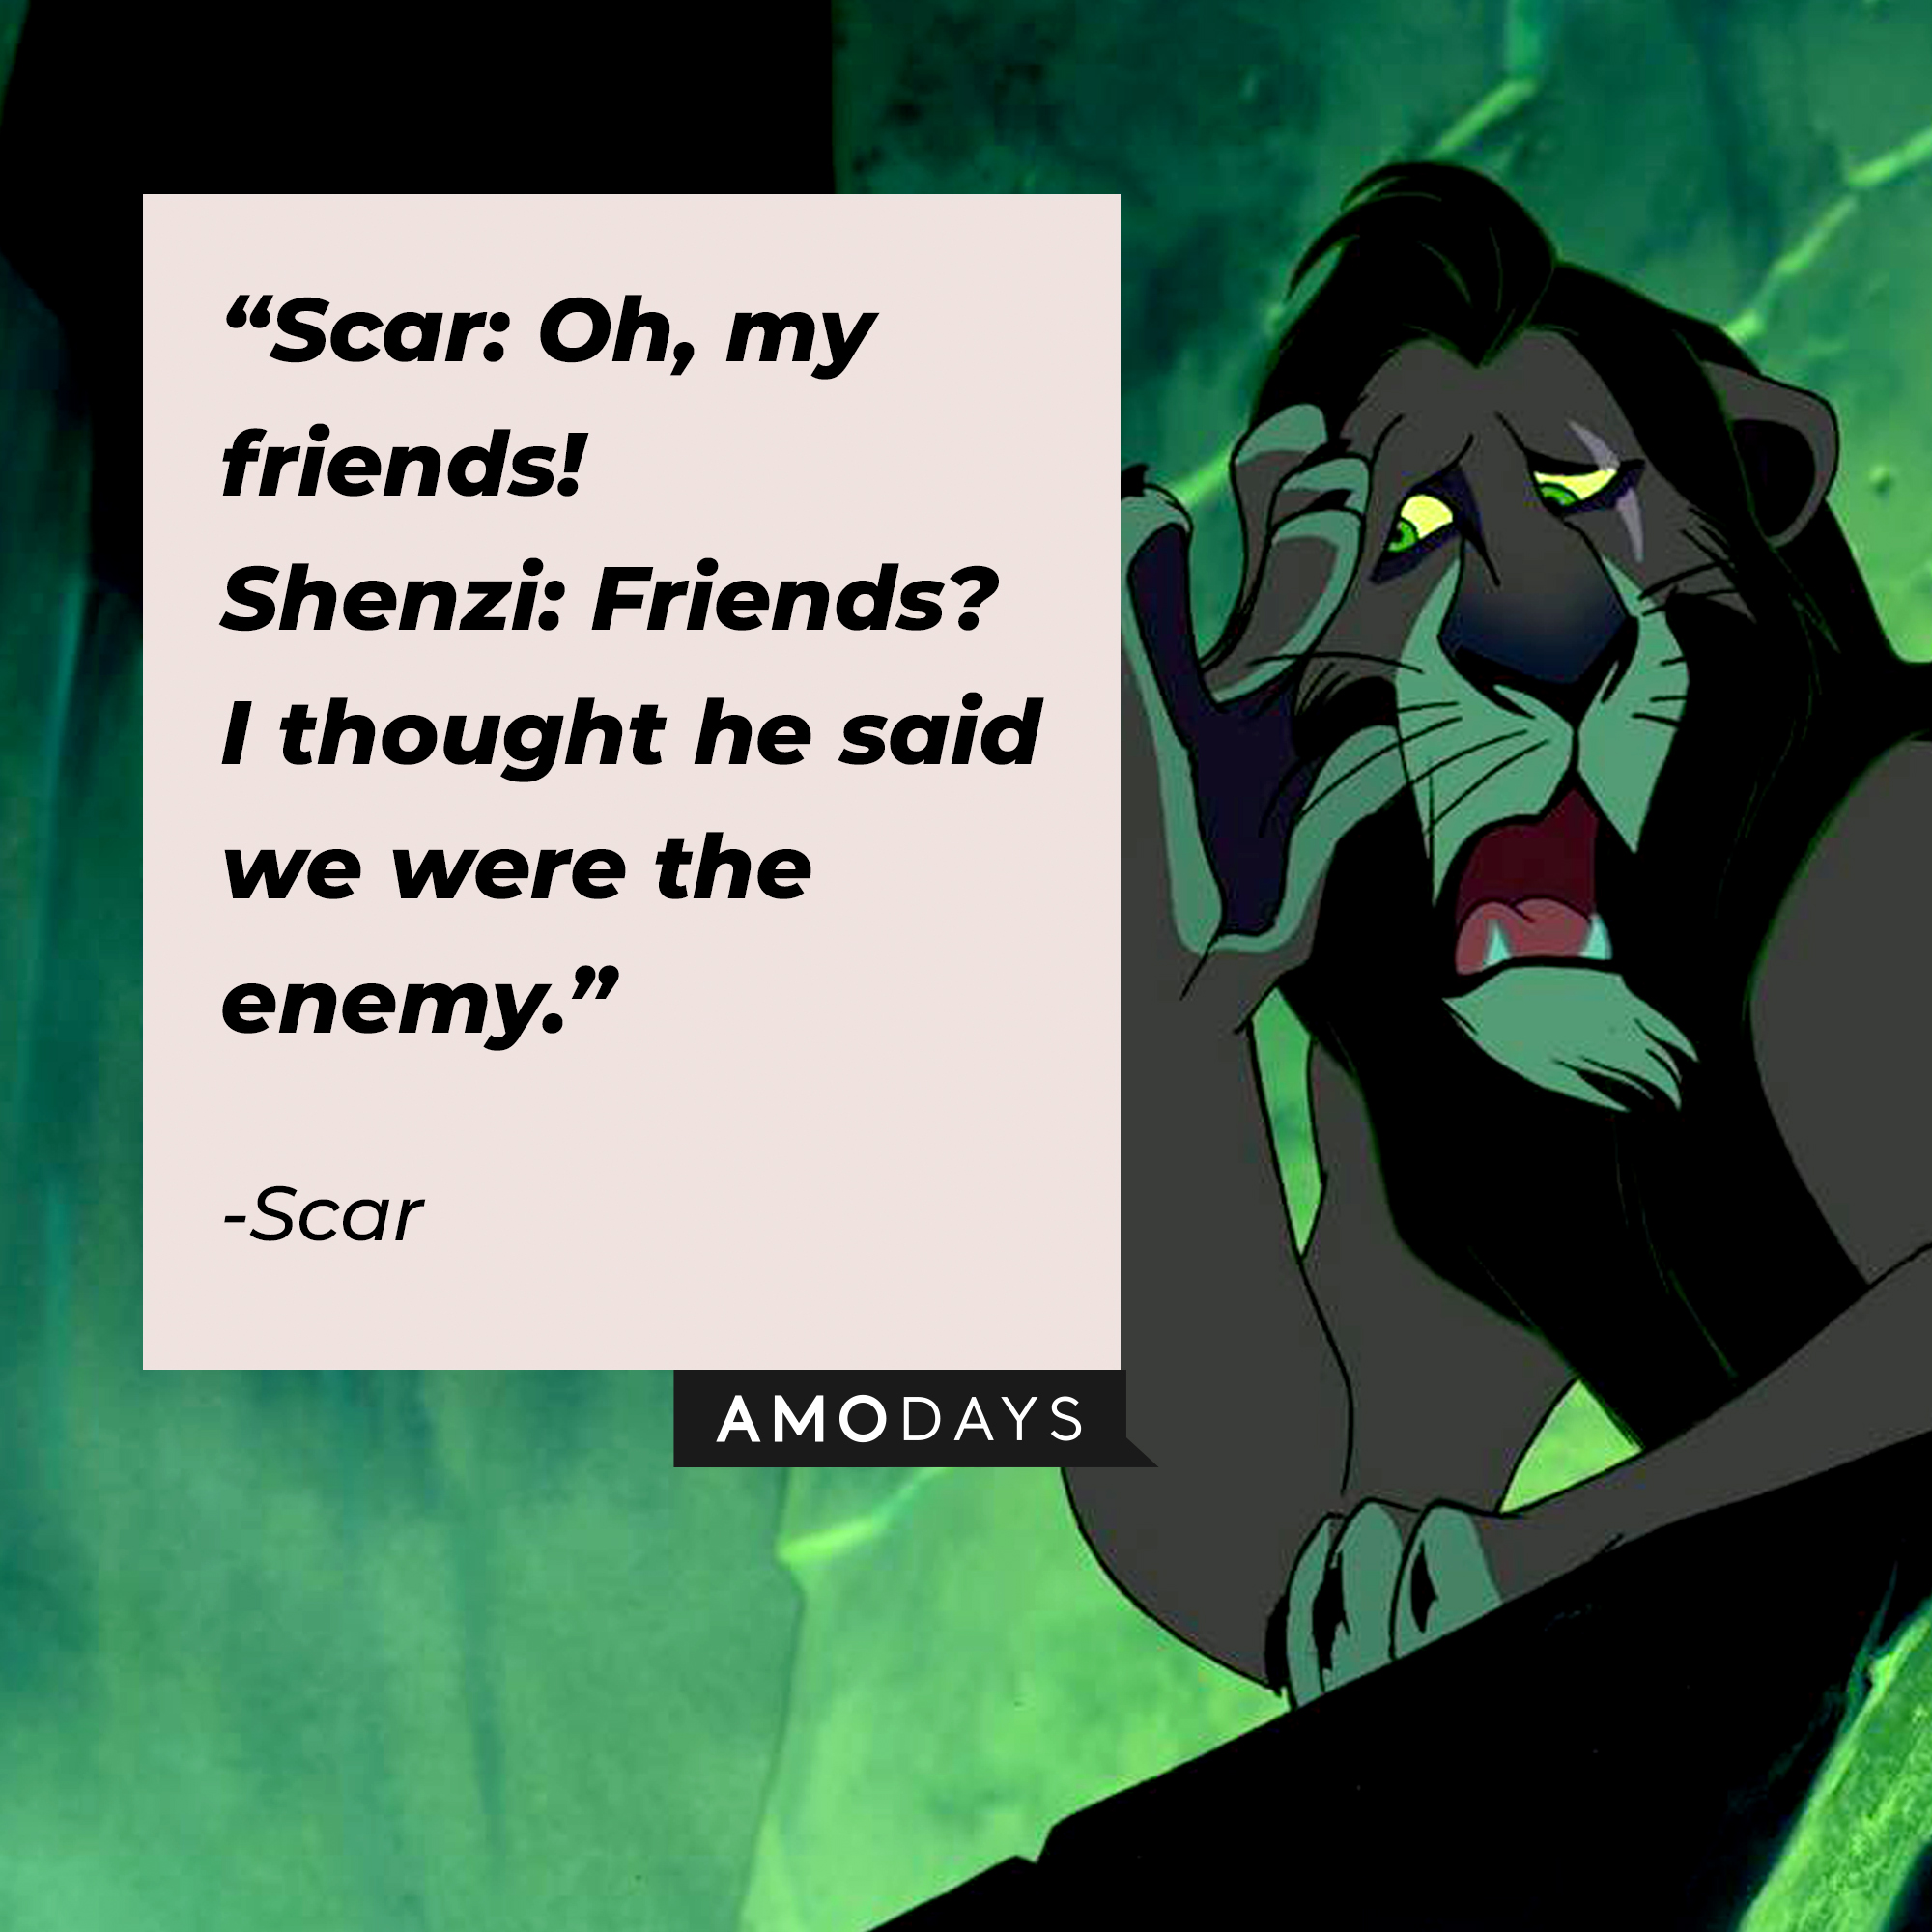 A photo of Scar with the quote, "Scar: Oh, my friends! Shenzi: Friends? I thought he said we were the enemy." | Source: Facebook/DisneyTheLionKing